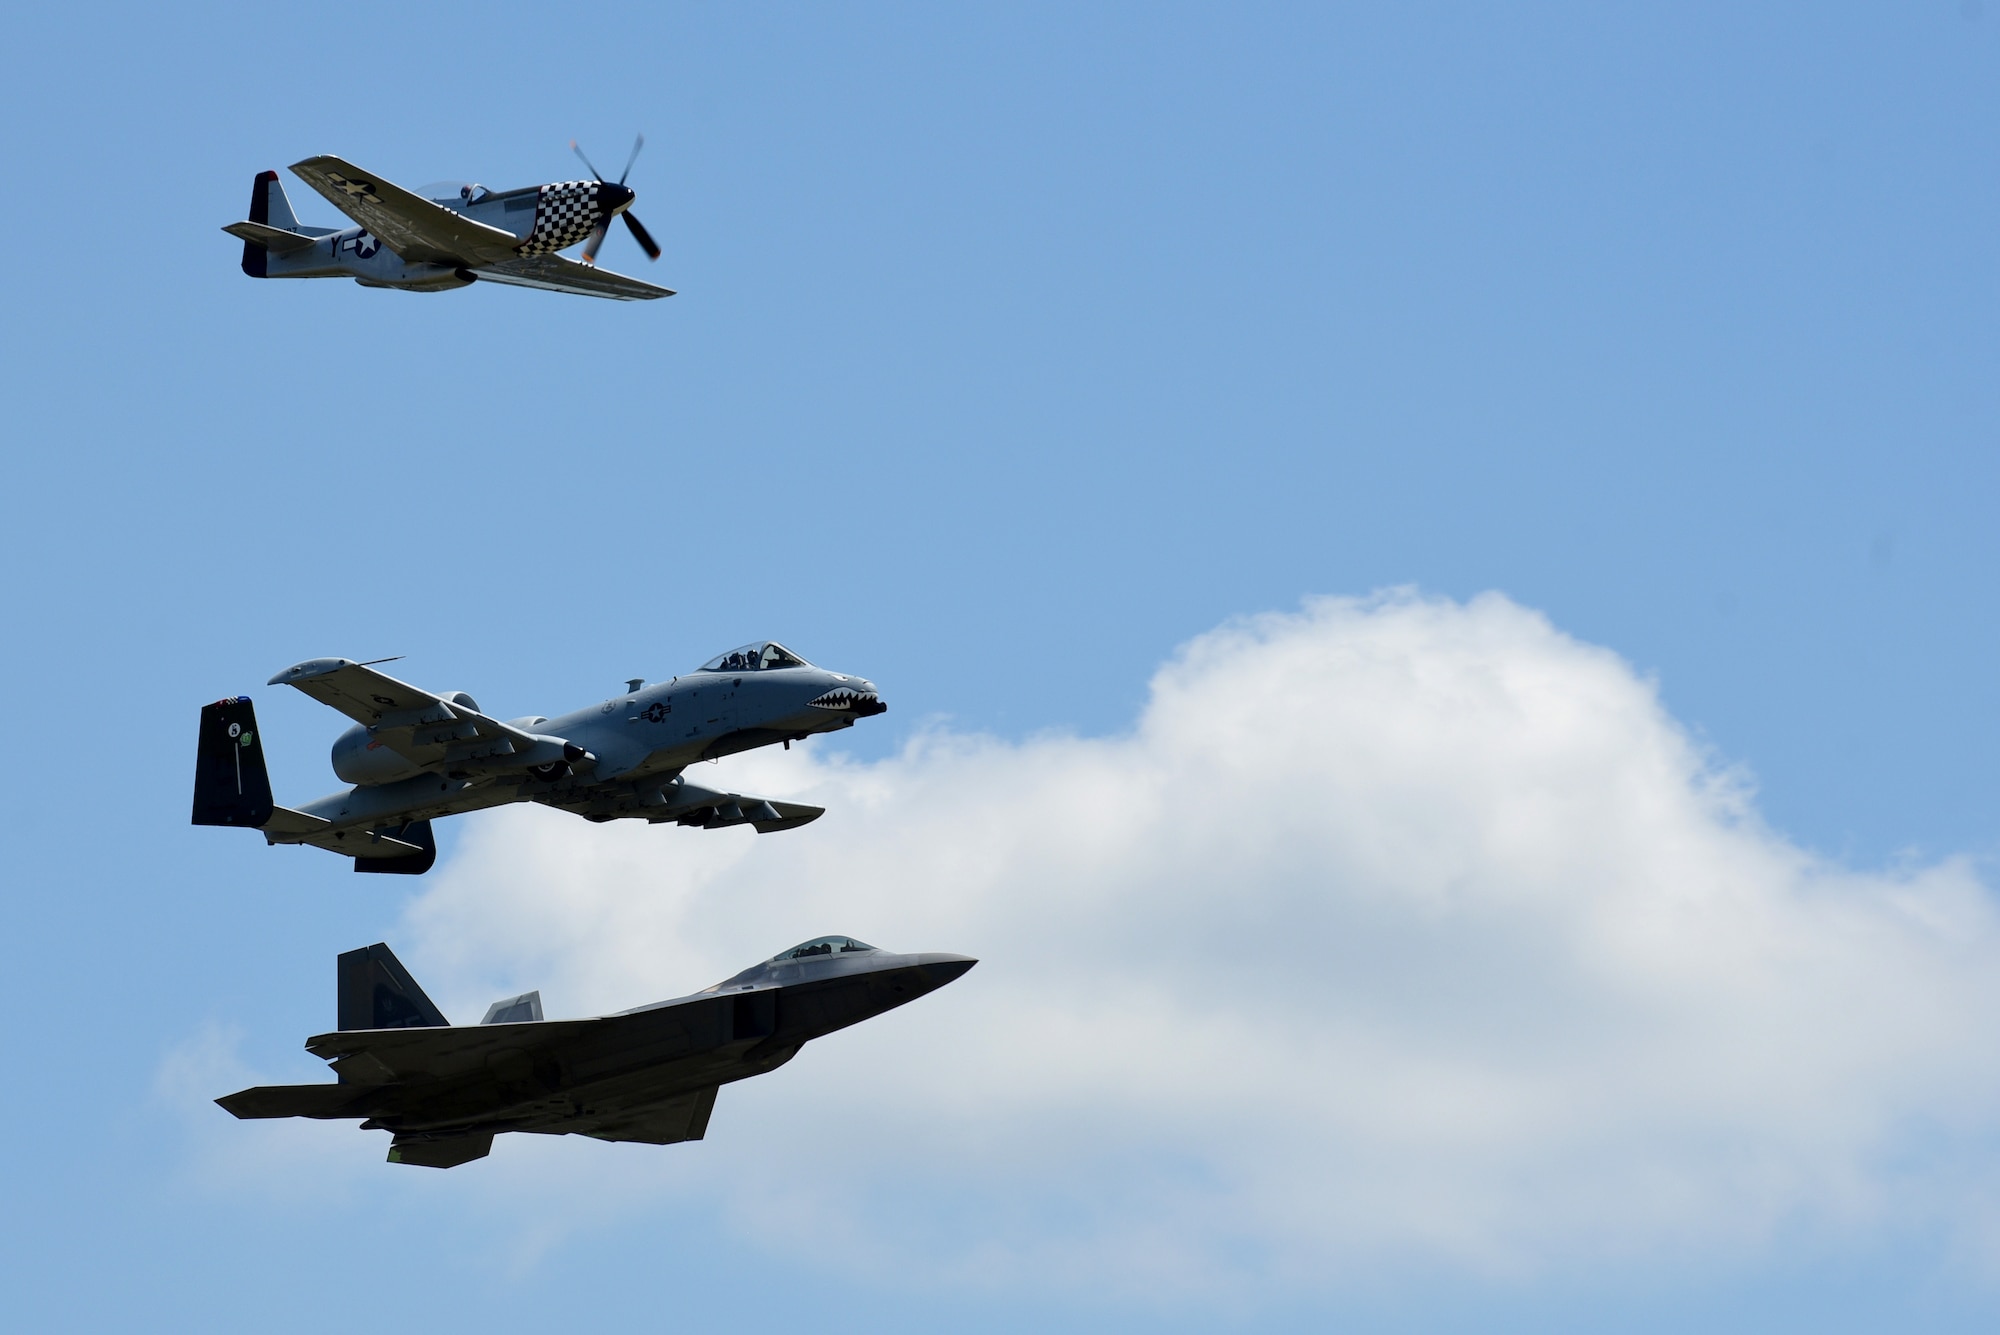 A P-51D Mustang, F-22 Raptor and A-10 Thunderbolt perform a tribute flight during the Wings Over Wayne Air Show, May 20, 2017, at Seymour Johnson Air Force Base, North Carolina. The formation consisted of aircraft dating back to World War II to current 5th-generation aircraft. (U.S. Air Force photo by Airman 1st Class Kenneth Boyton)